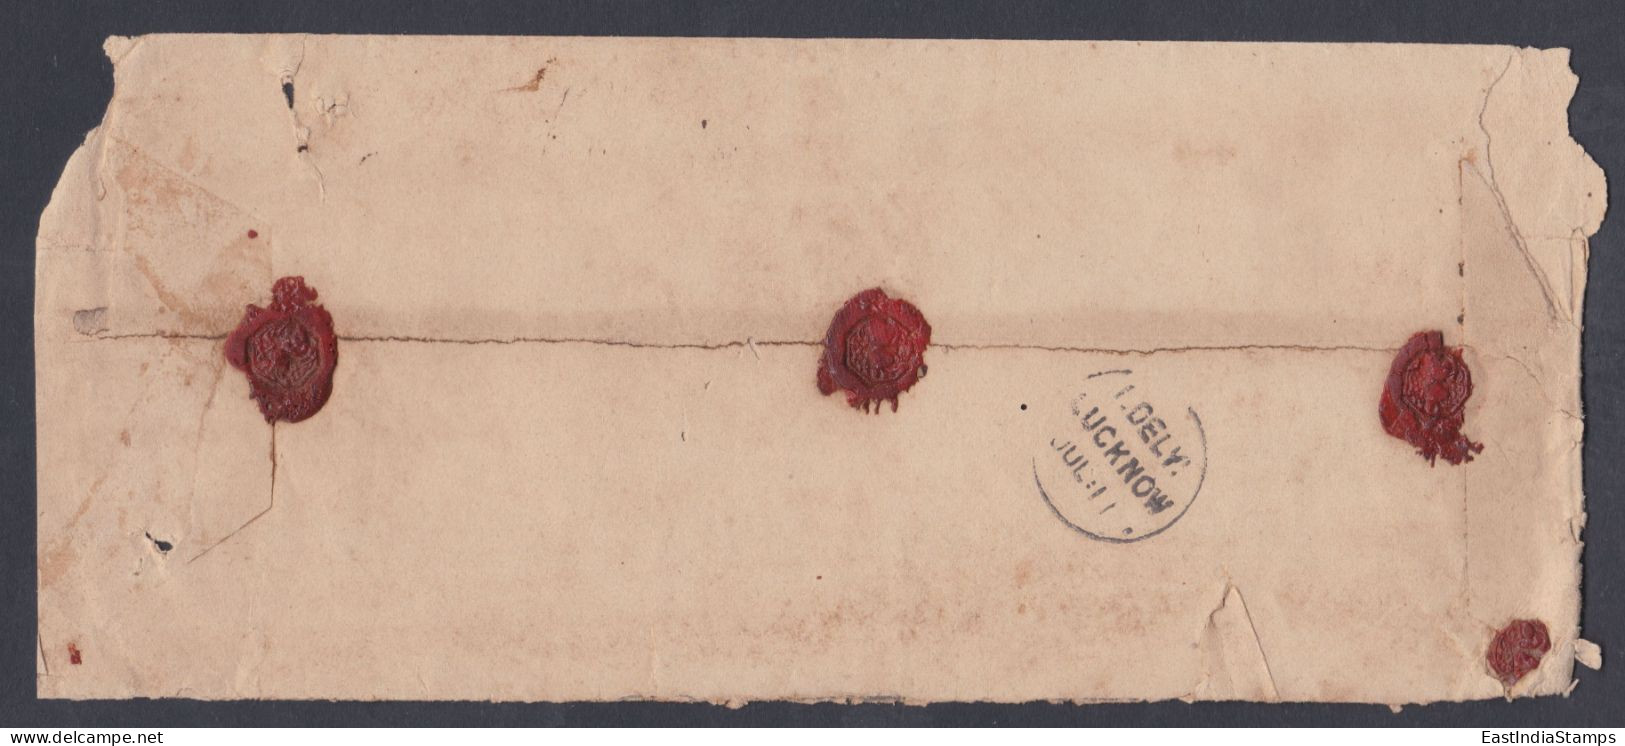 Inde India 1860's Used Registered Cover East India Queen Victoria Stamps, Half Anna Block Of 10, Lucknow, M-7 Postmark - 1858-79 Compagnie Des Indes & Gouvernement De La Reine